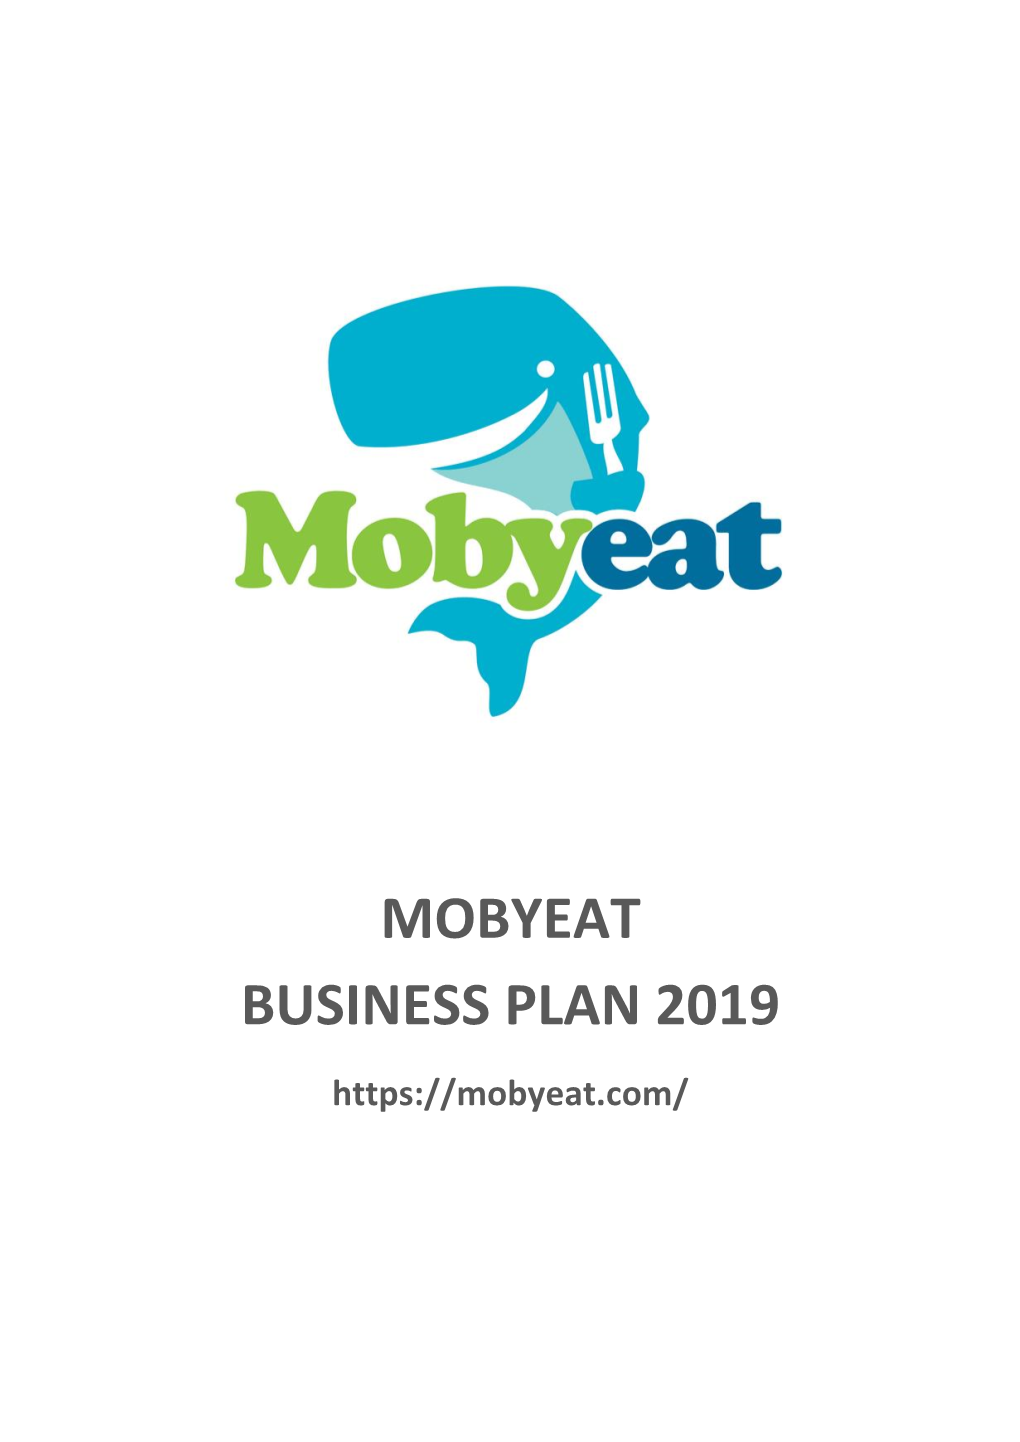 Mobyeat Business Plan 2019